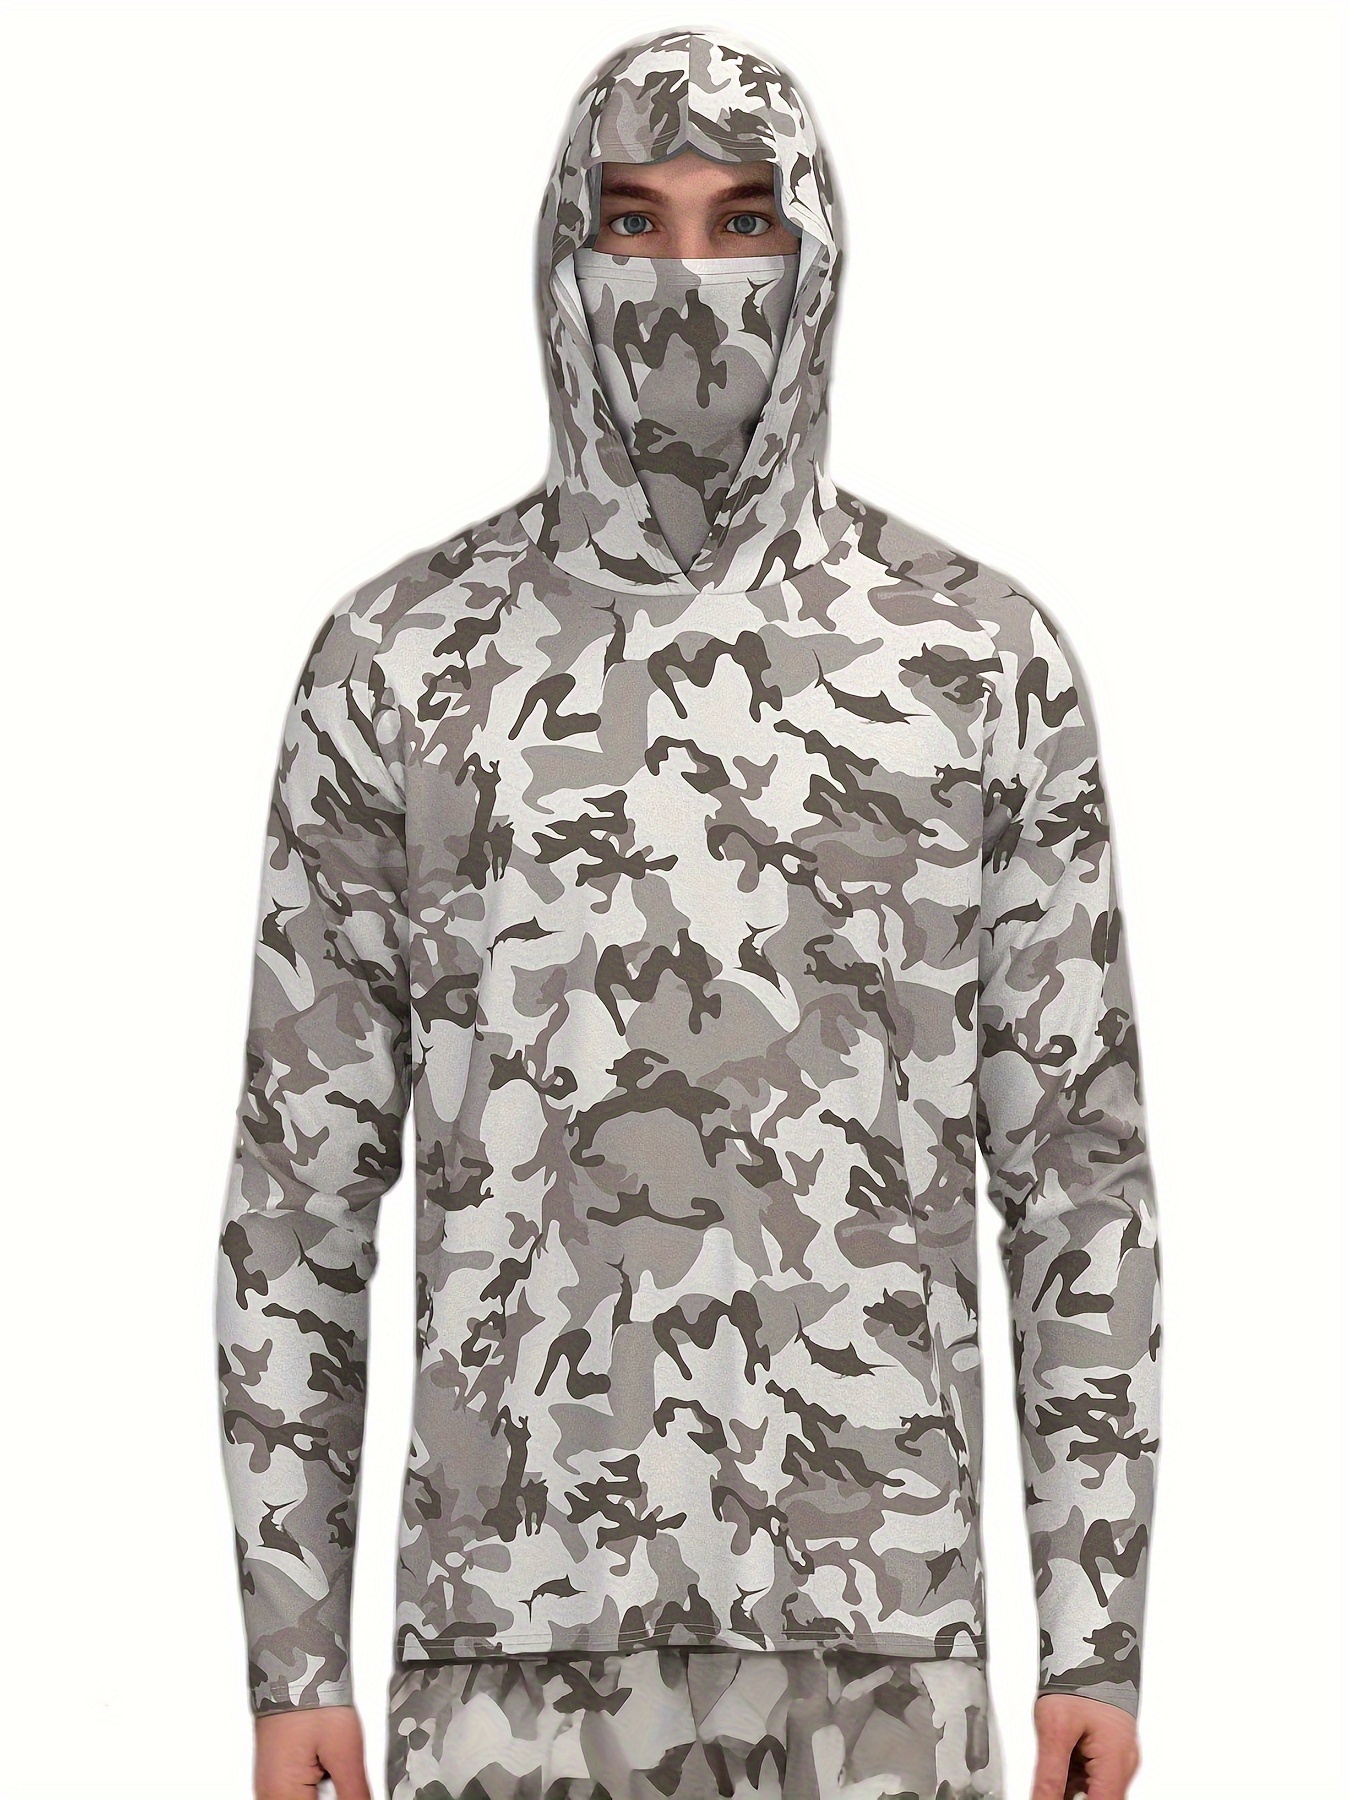 Angler] Breathable Quick-Drying Long-Sleeved Hooded Fishing